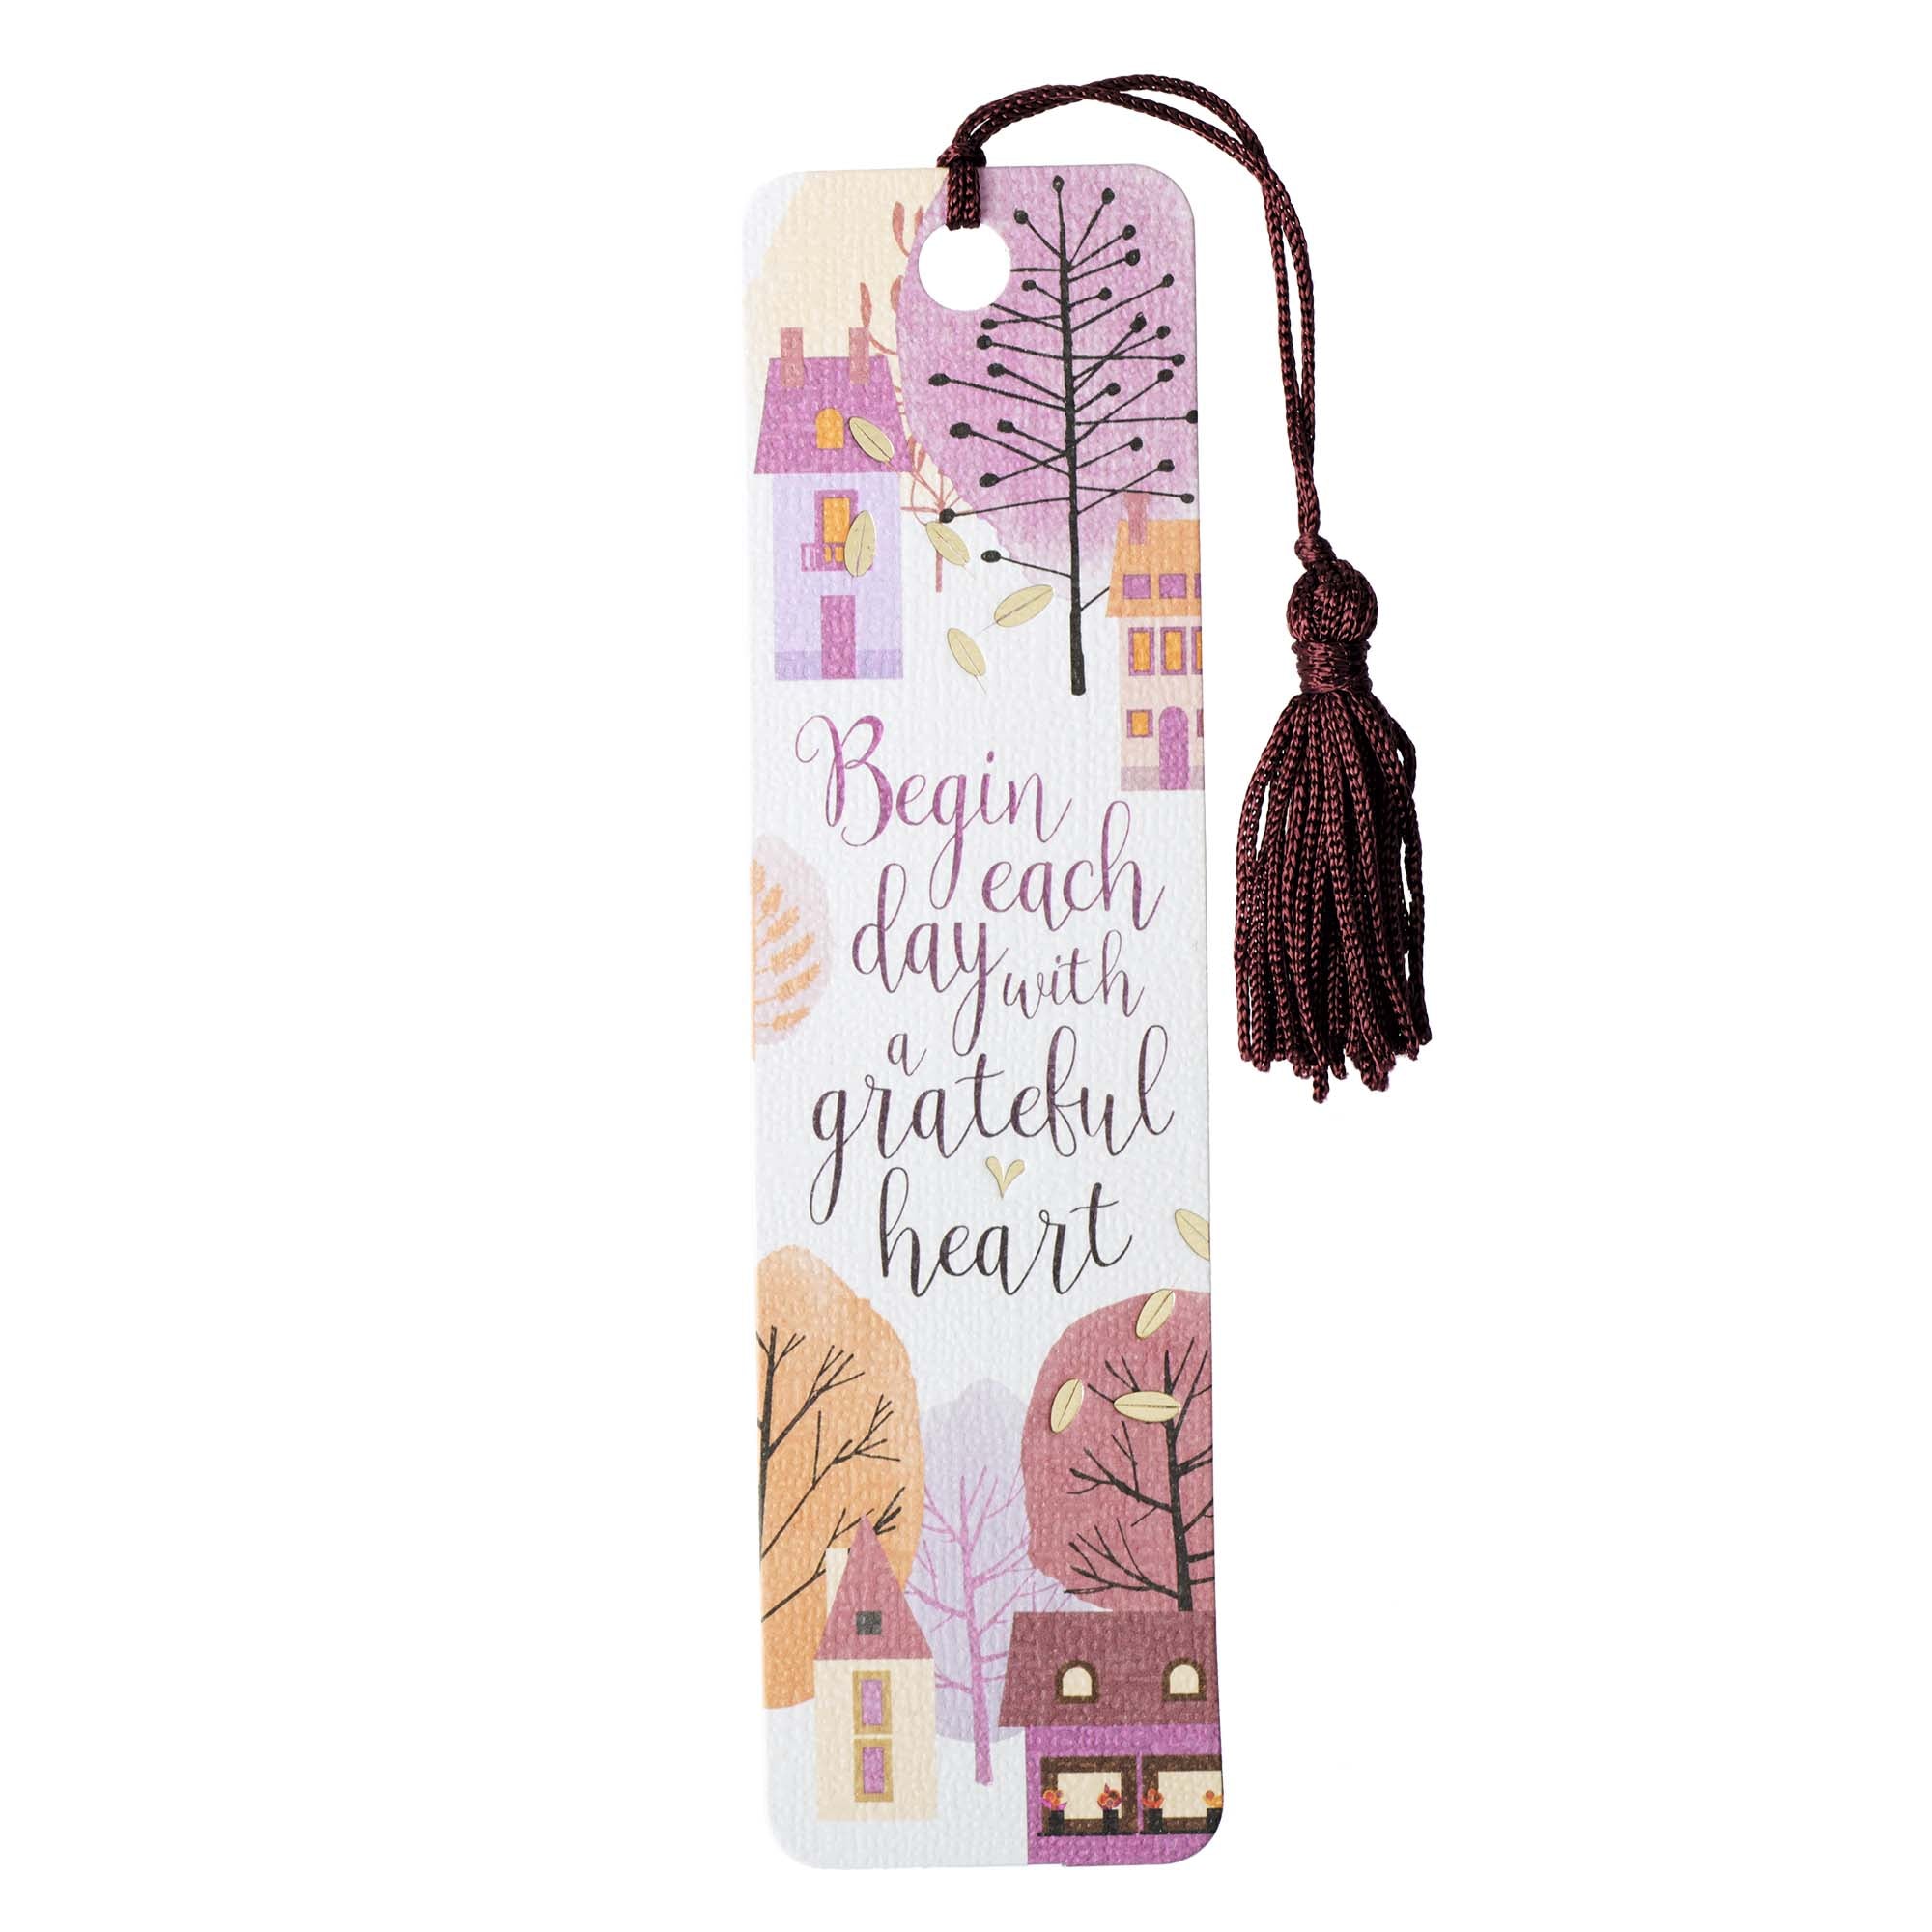 Image of Begin Each Day with a Grateful Heart Boomark with Tassel other